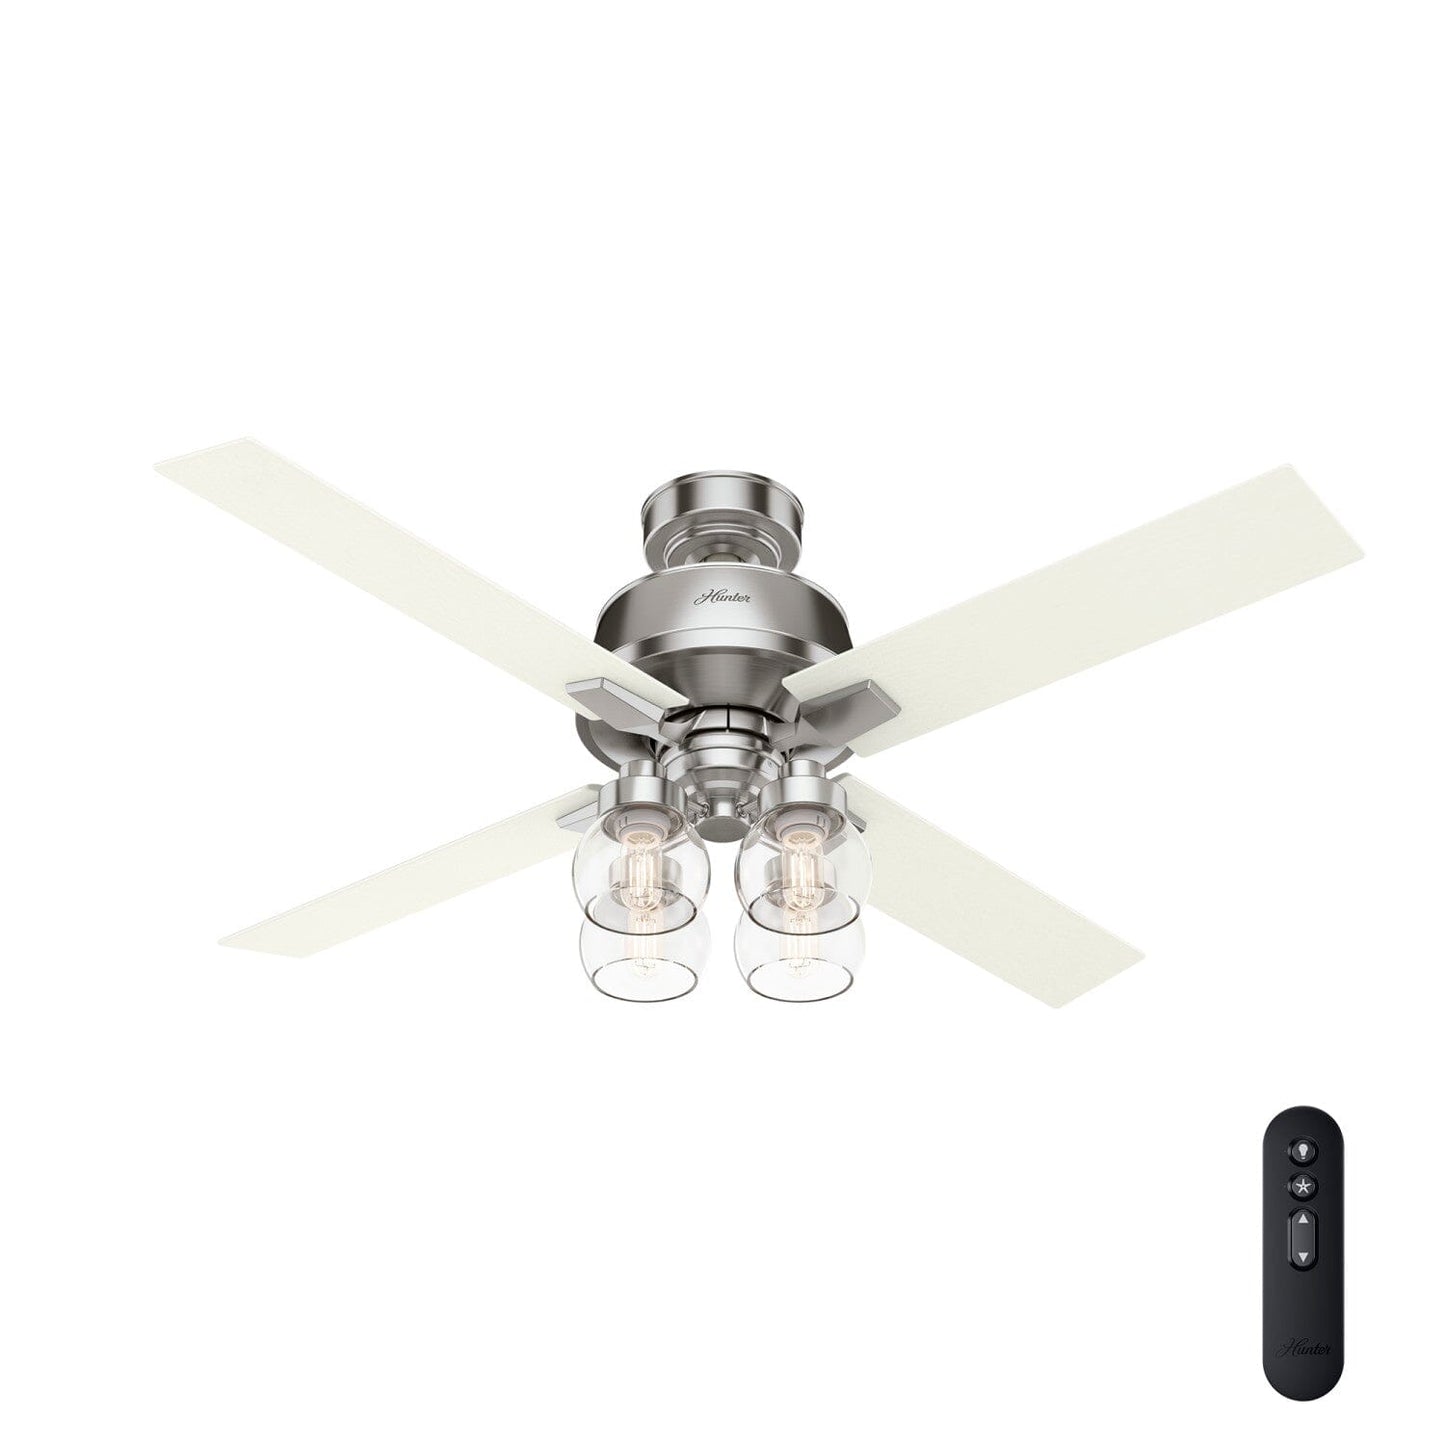 Vivien with LED Light and Remote Control 52 inch Ceiling Fans Hunter Brushed Nickel - White Grain 